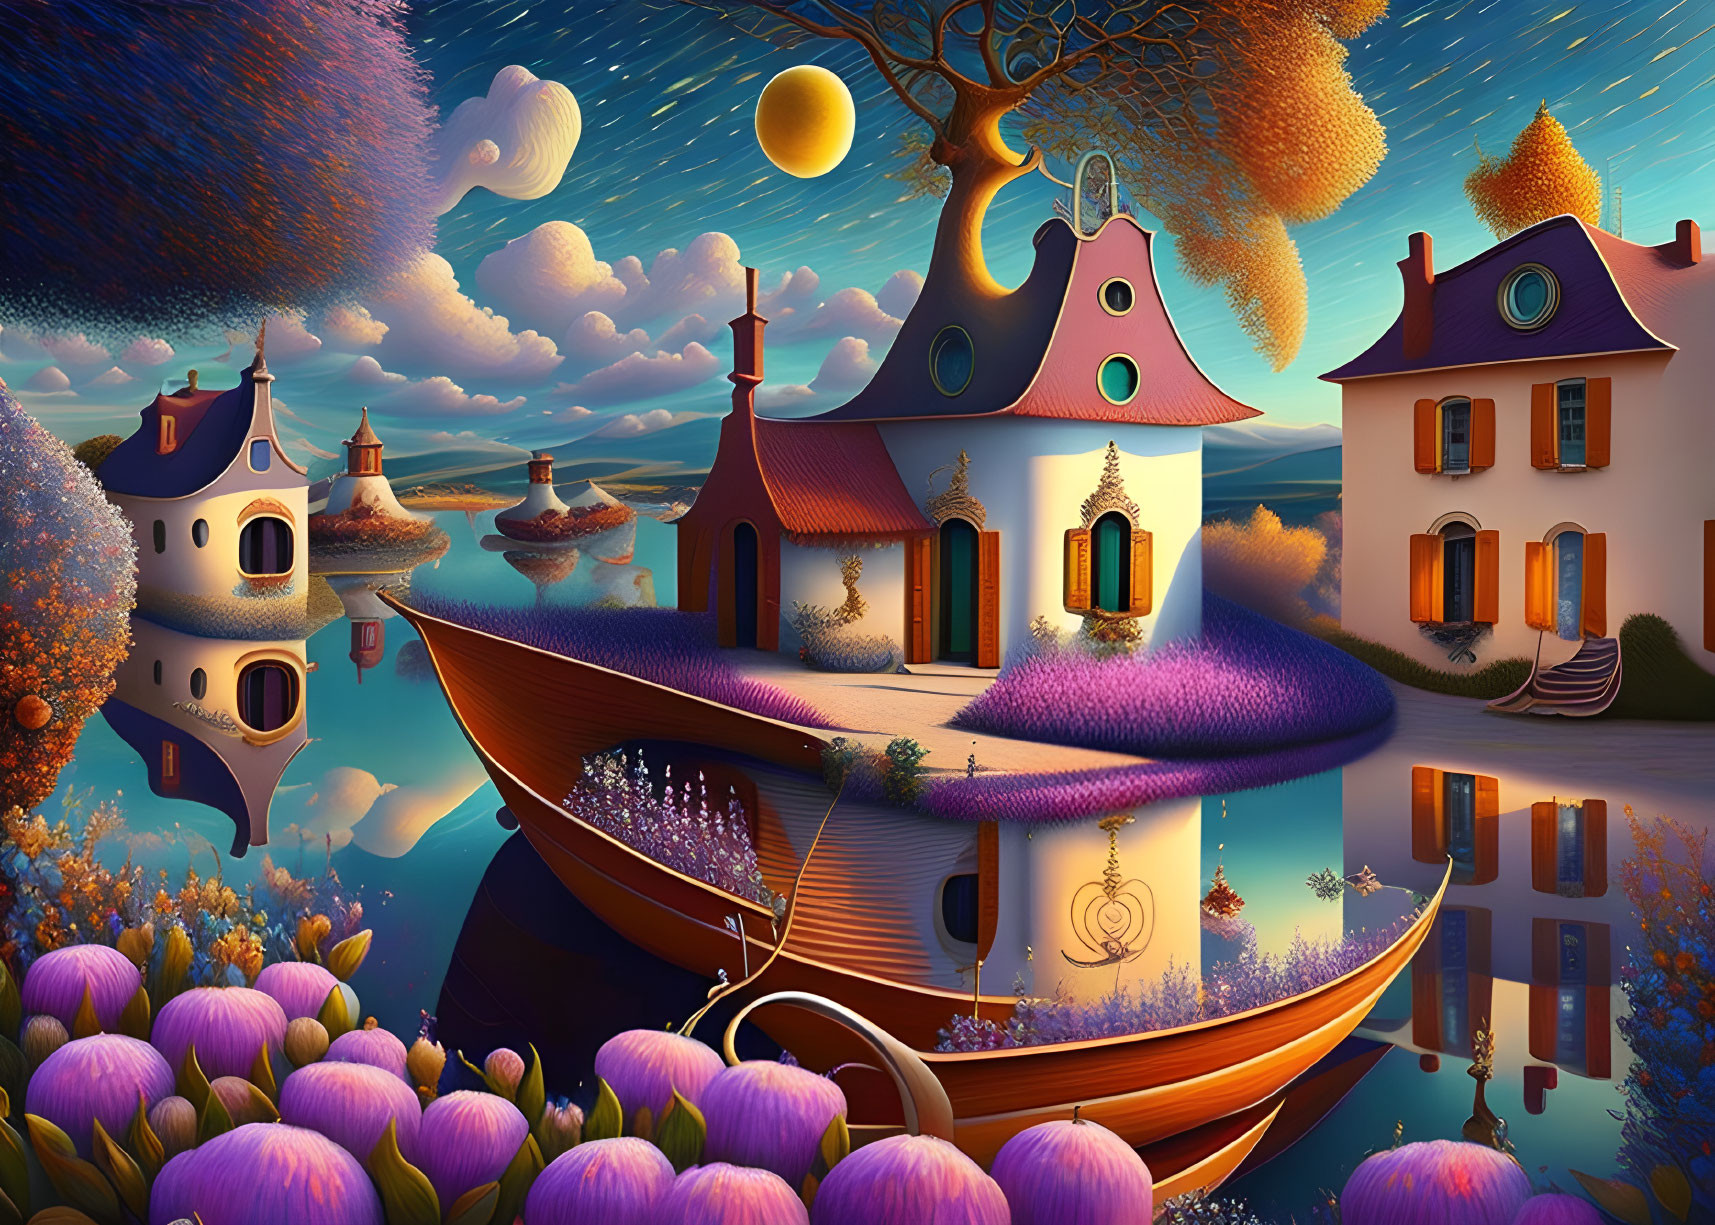 Colorful houses, boat on lake, surreal sky with moons - Whimsical landscape scene